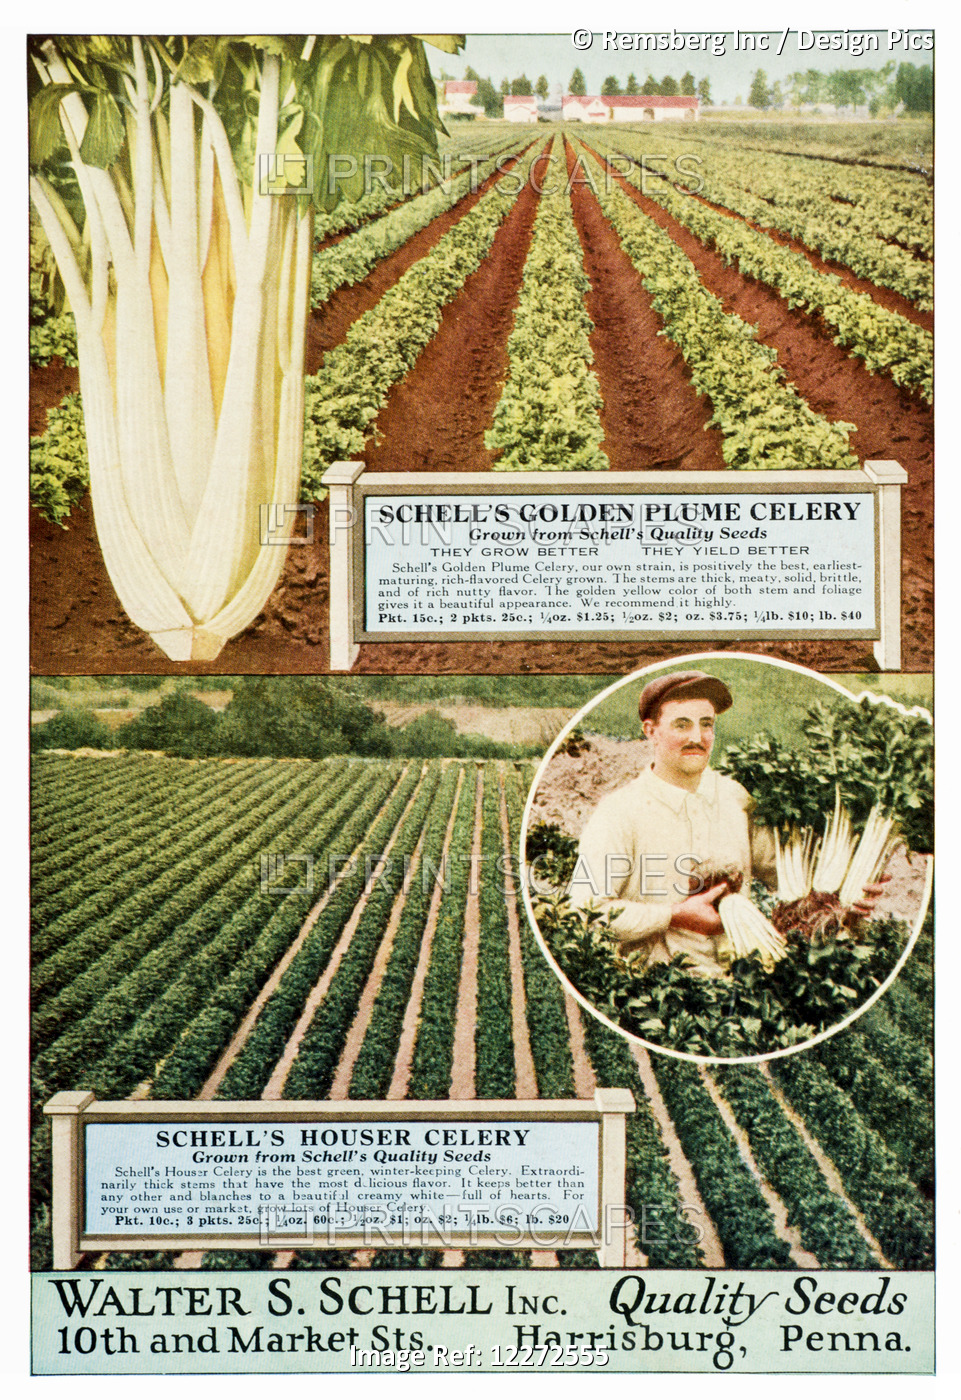 Historic Walter S. Schell Seed Catalog From 20th Century.